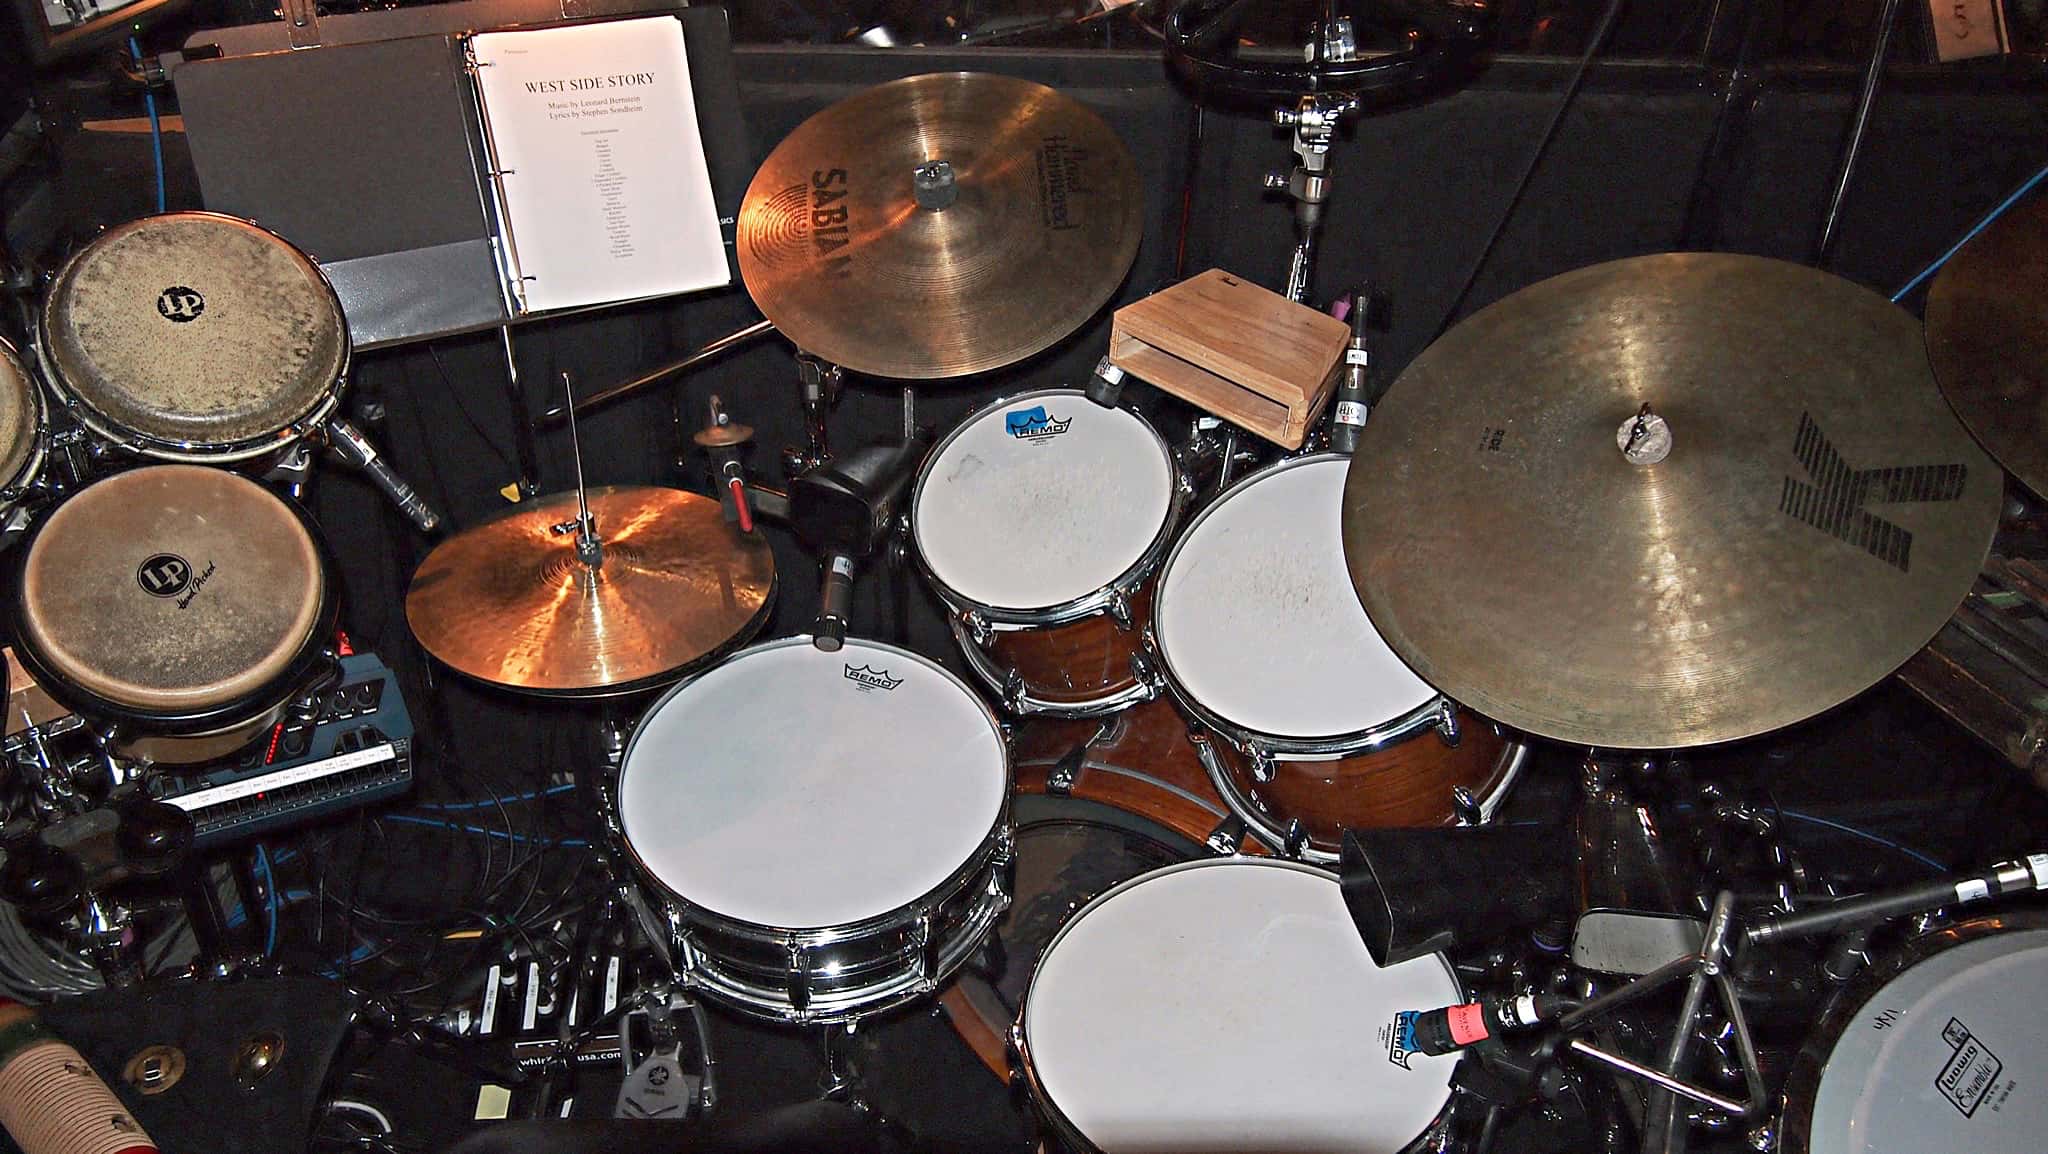 Alec Wilmart's drum set setup for West Side Story at the 5th Avenue Theatre in Seattle, Washington.